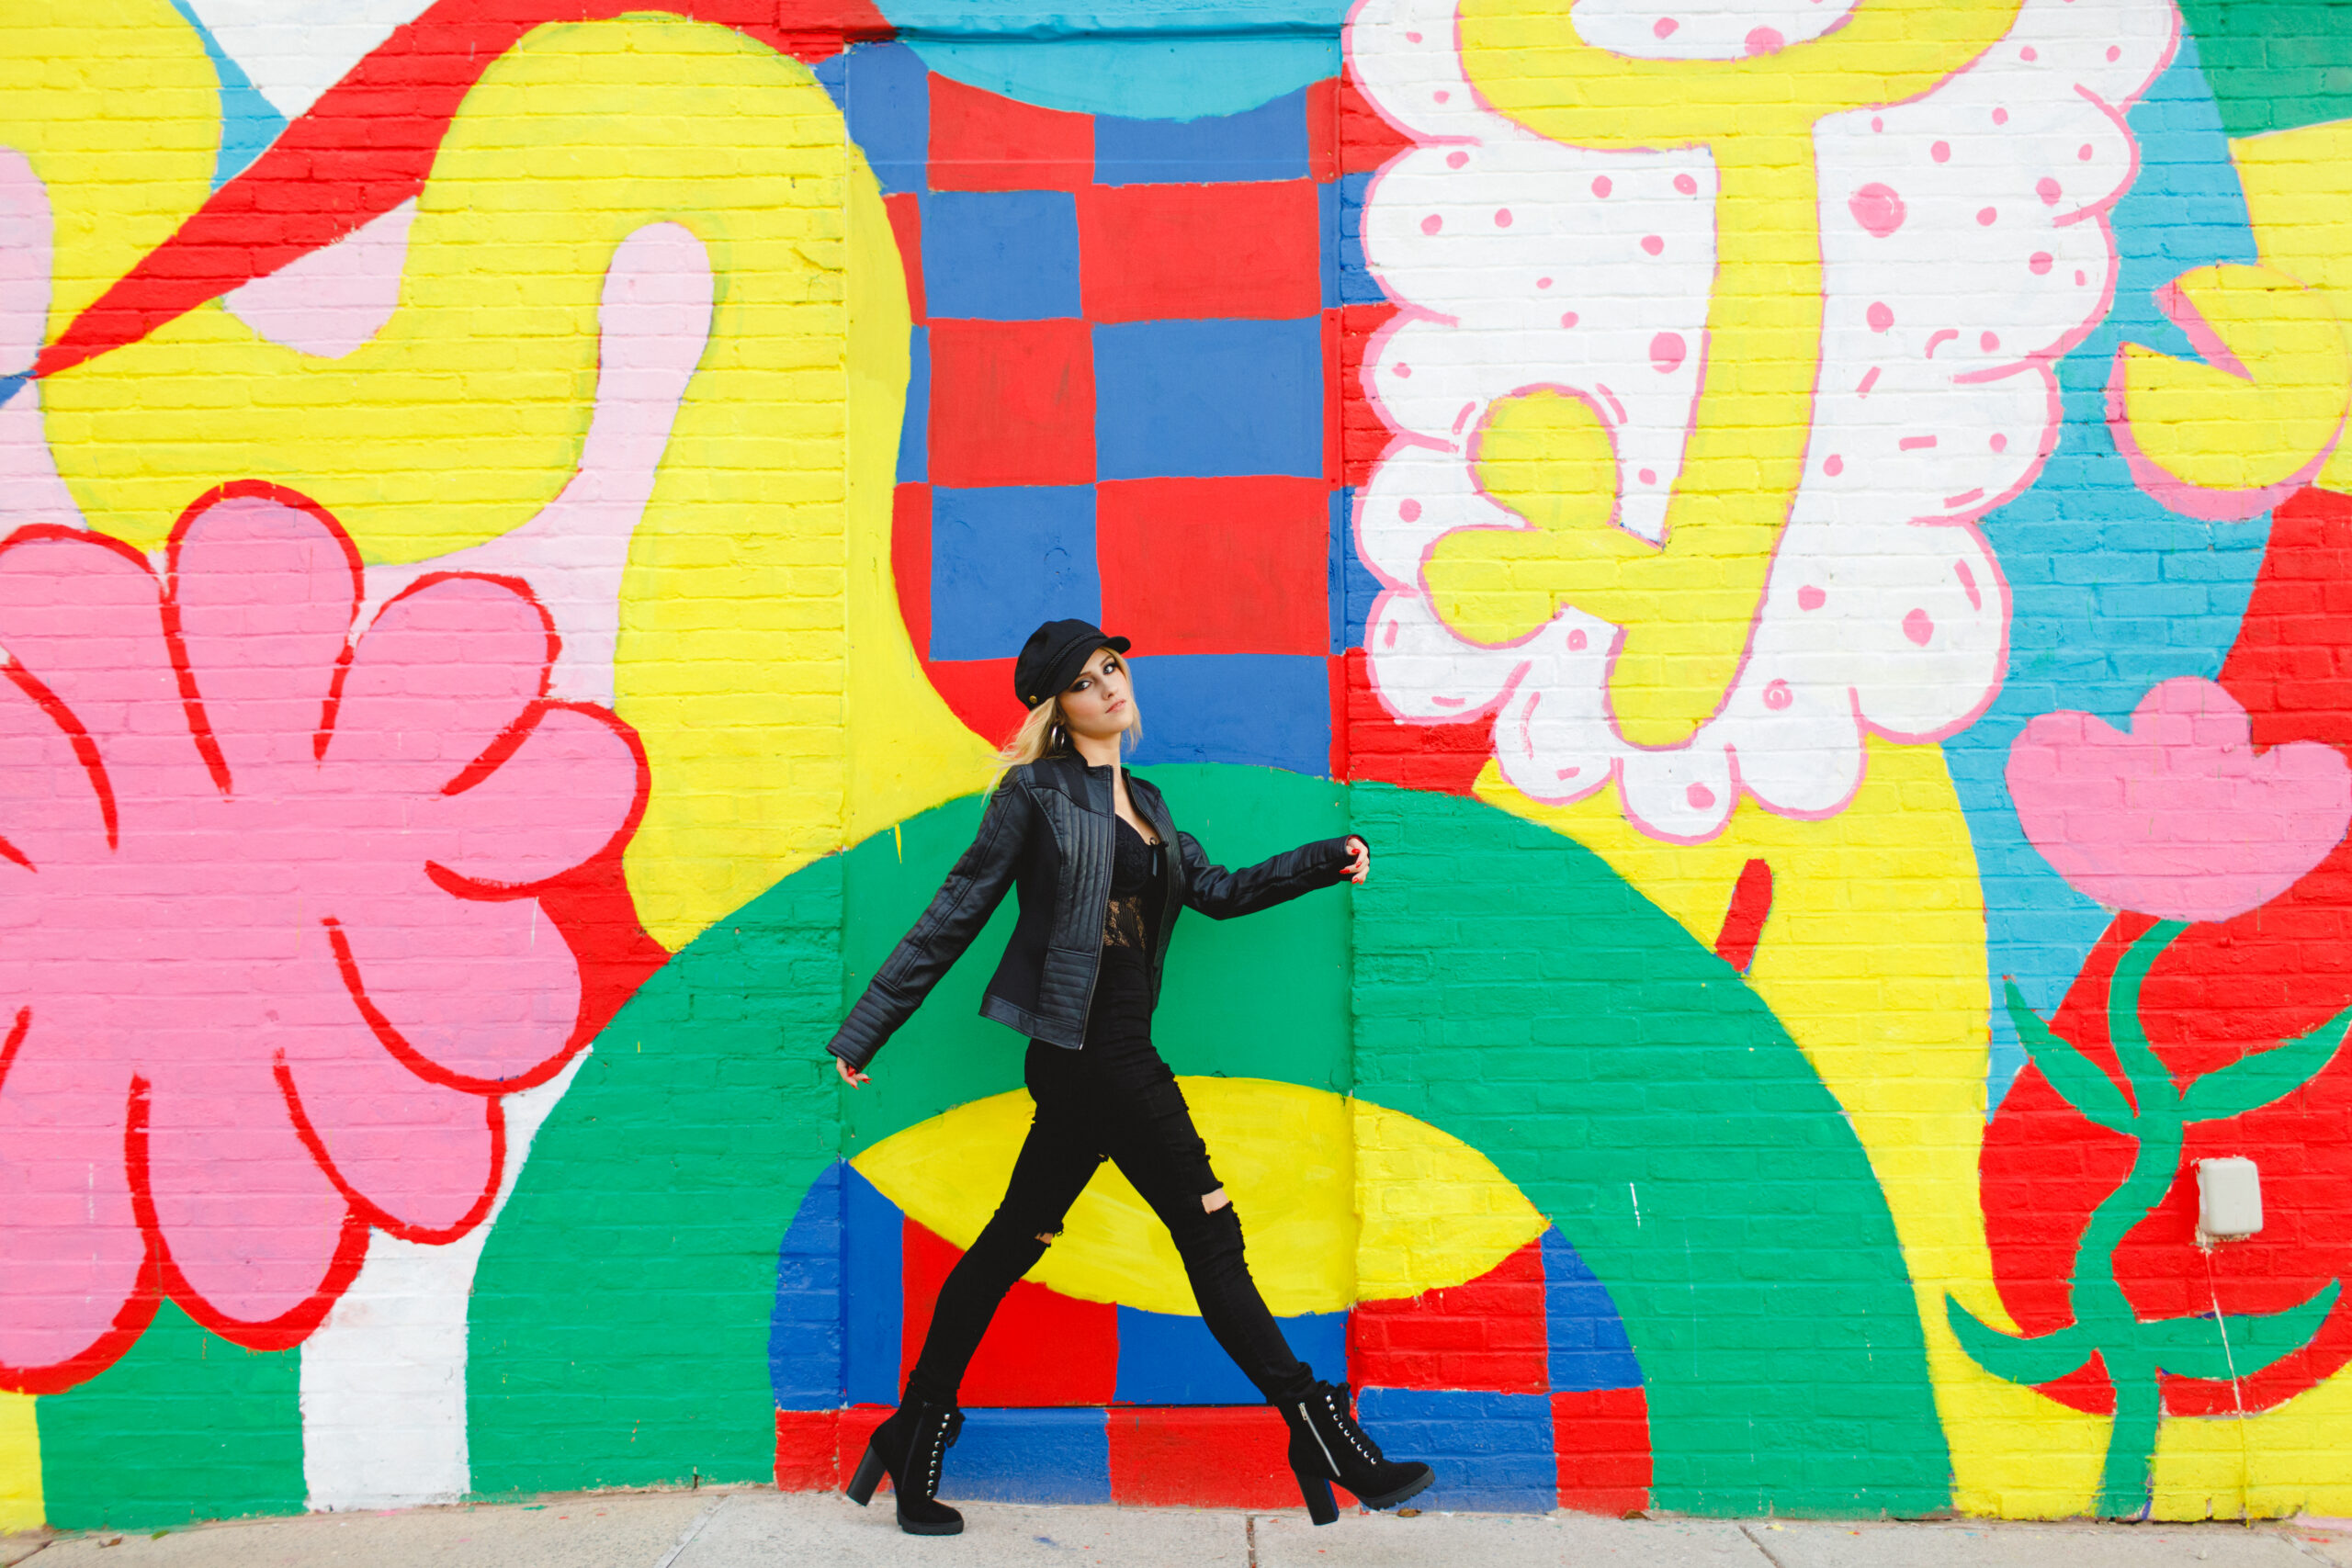 Andrina walking down the sidewalk in an all black outfit in front of a bright colored trendy mural